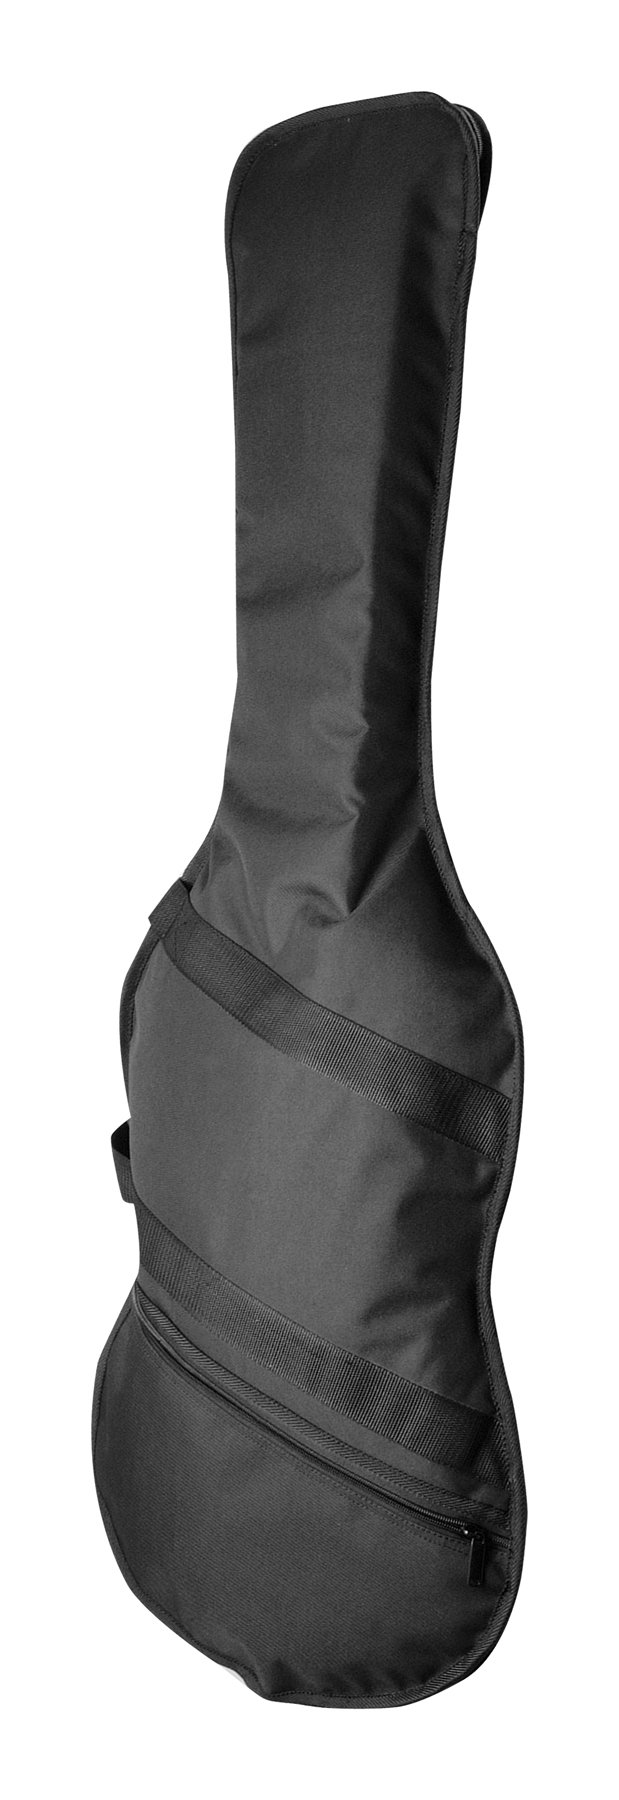 On Stage GBA4550 Acoustic Guitar Bag Black -  On-Stage